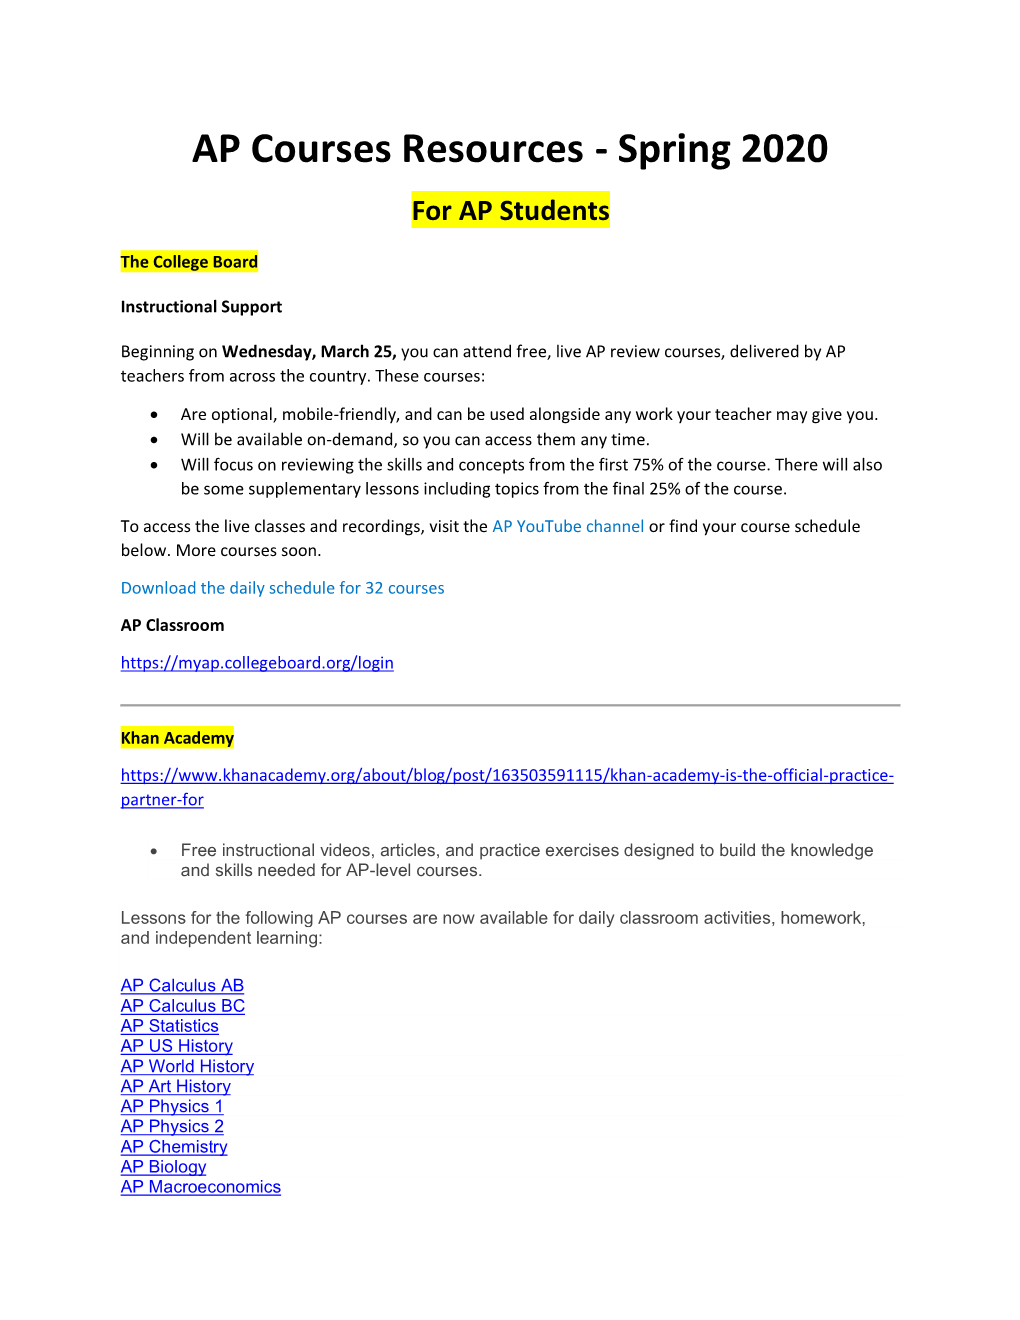 AP Courses Resources - Spring 2020 for AP Students